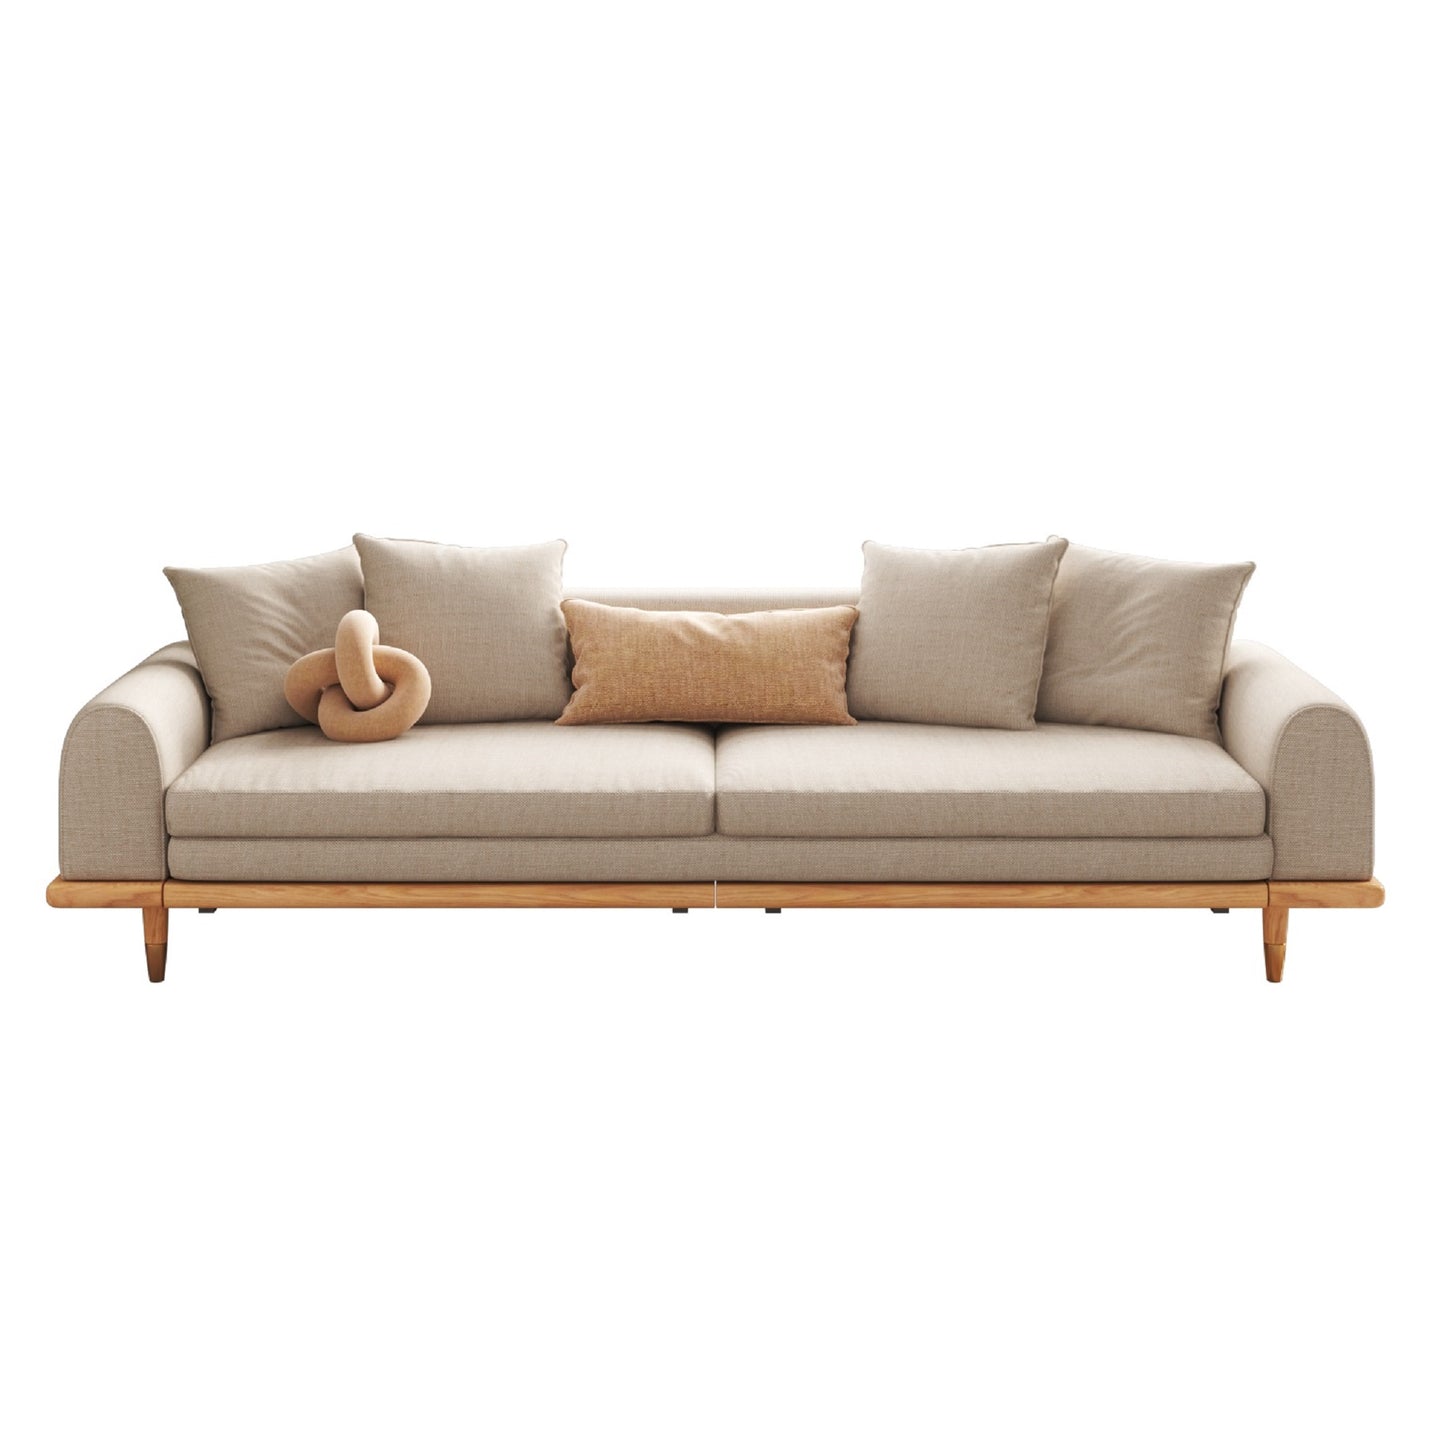 JASIWAY Three-Seater Wooden Frame Sofa Bed